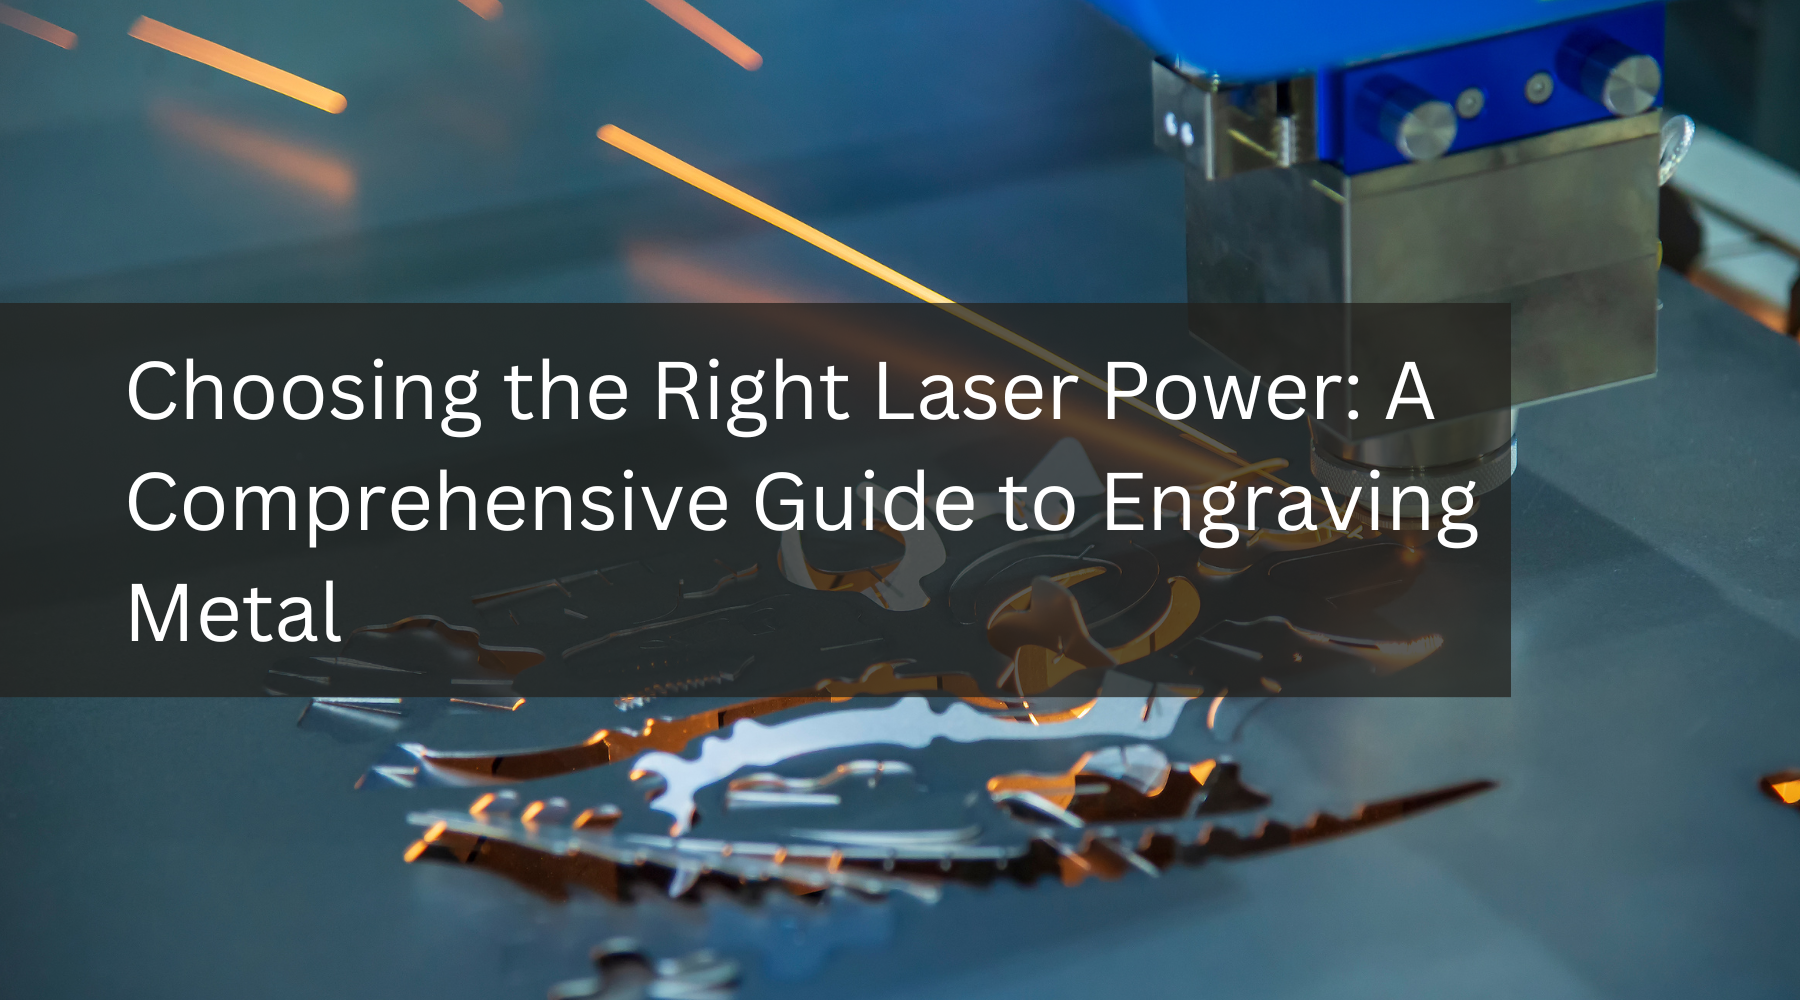 Choosing the Right Laser Power: A Comprehensive Guide to Engraving Metal